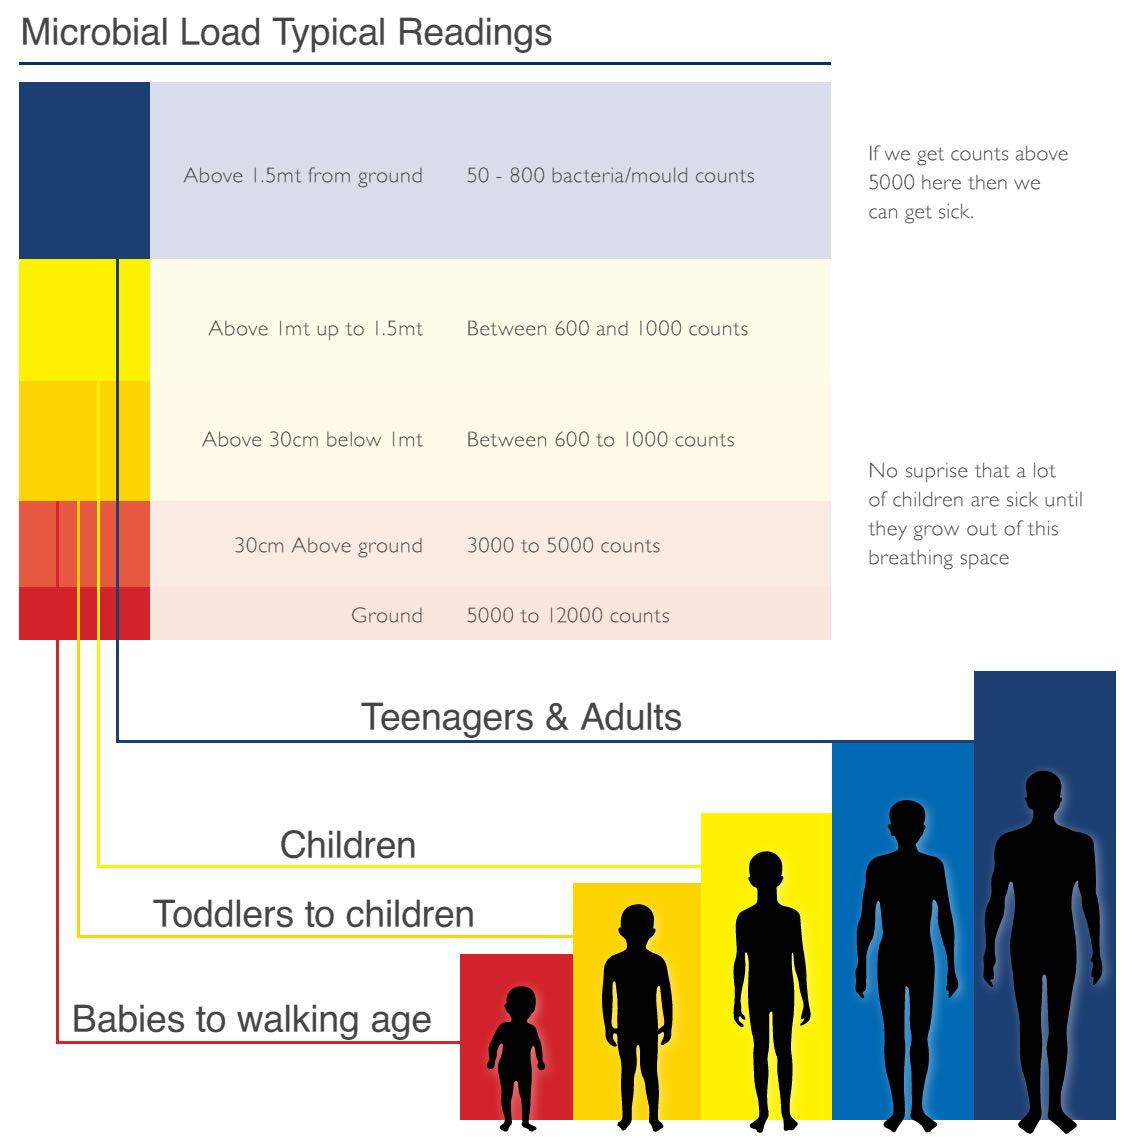 microbial load typical readings